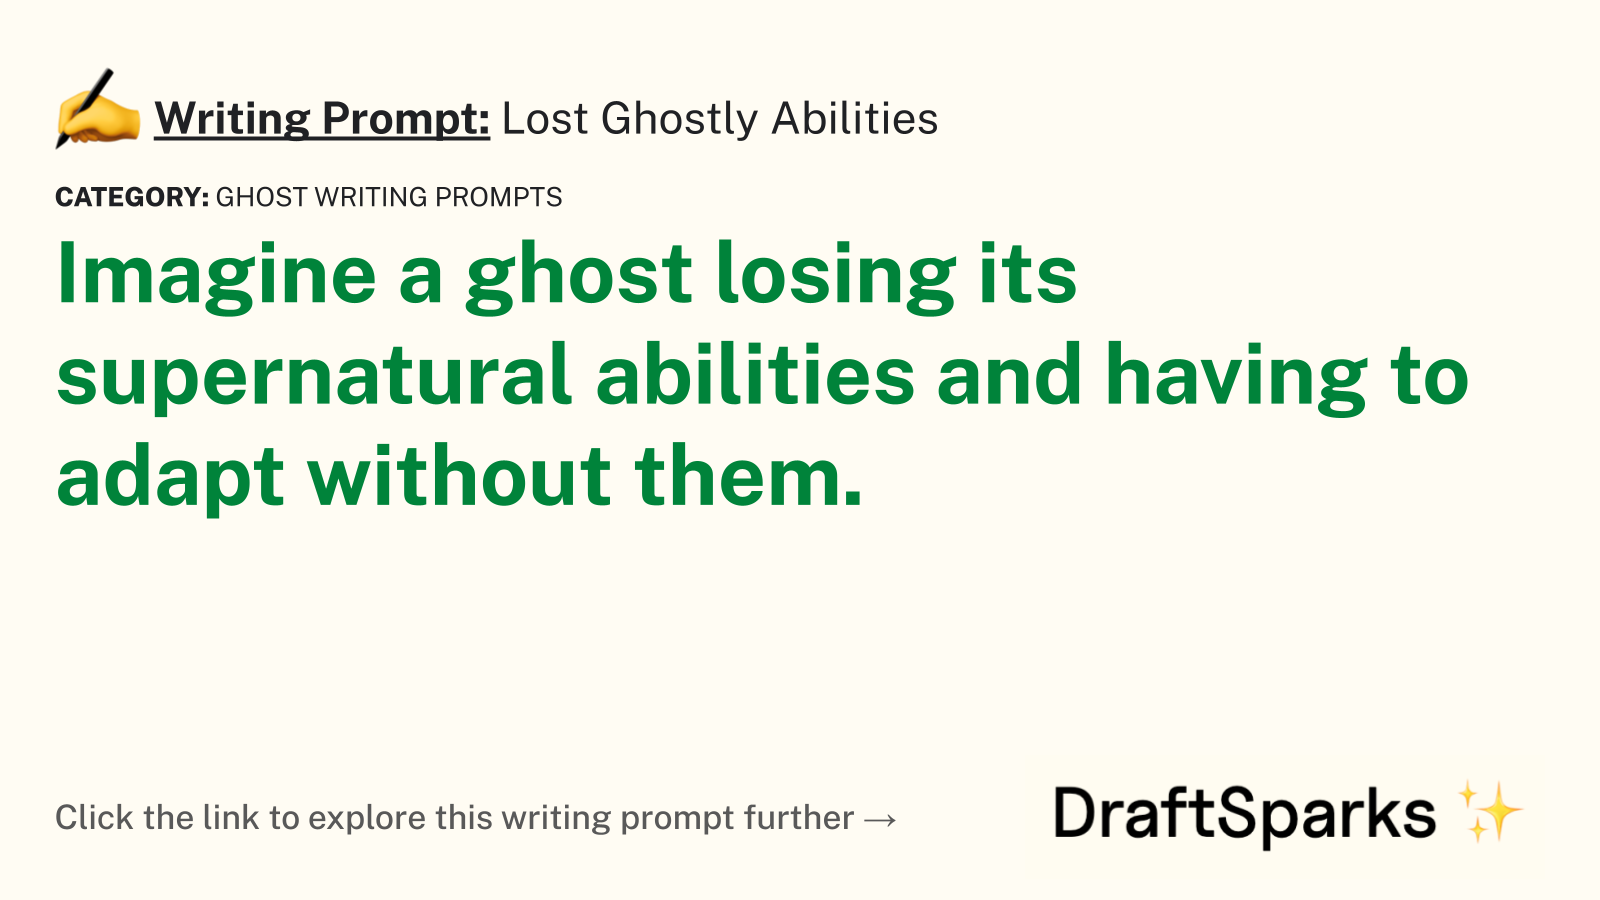 Lost Ghostly Abilities